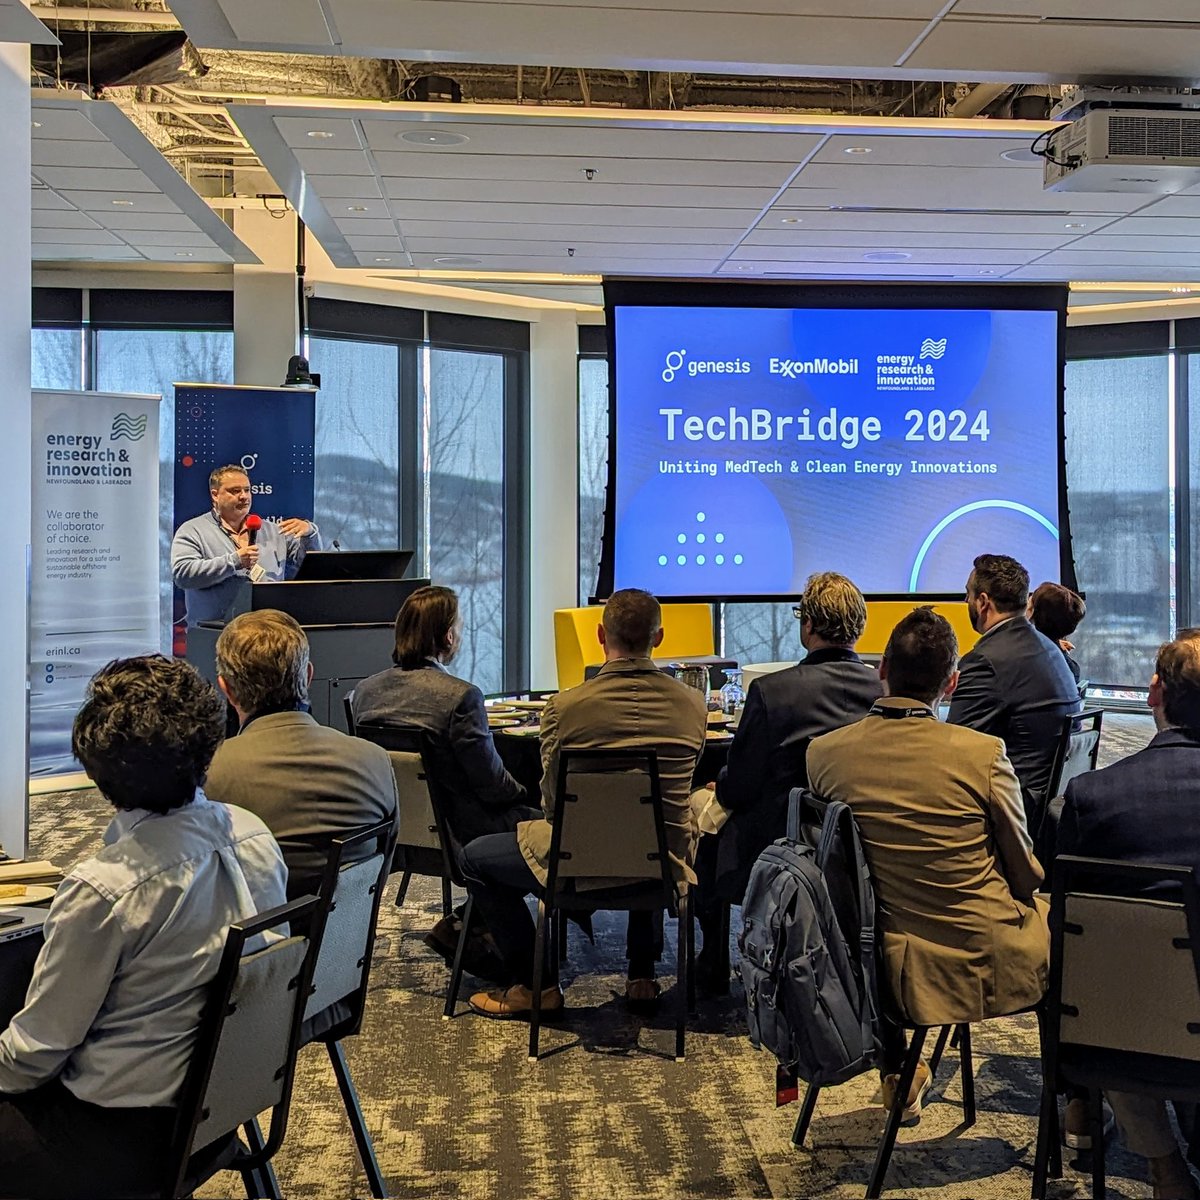 The RIO team is excited to attend @Genesis_Centre @exxonmobil @erinl_ca Tech Bridge 2024 Uniting MedTech & Clean Energy Innovations session today to hear from some of the amazing work happening at Genesis #Innovation